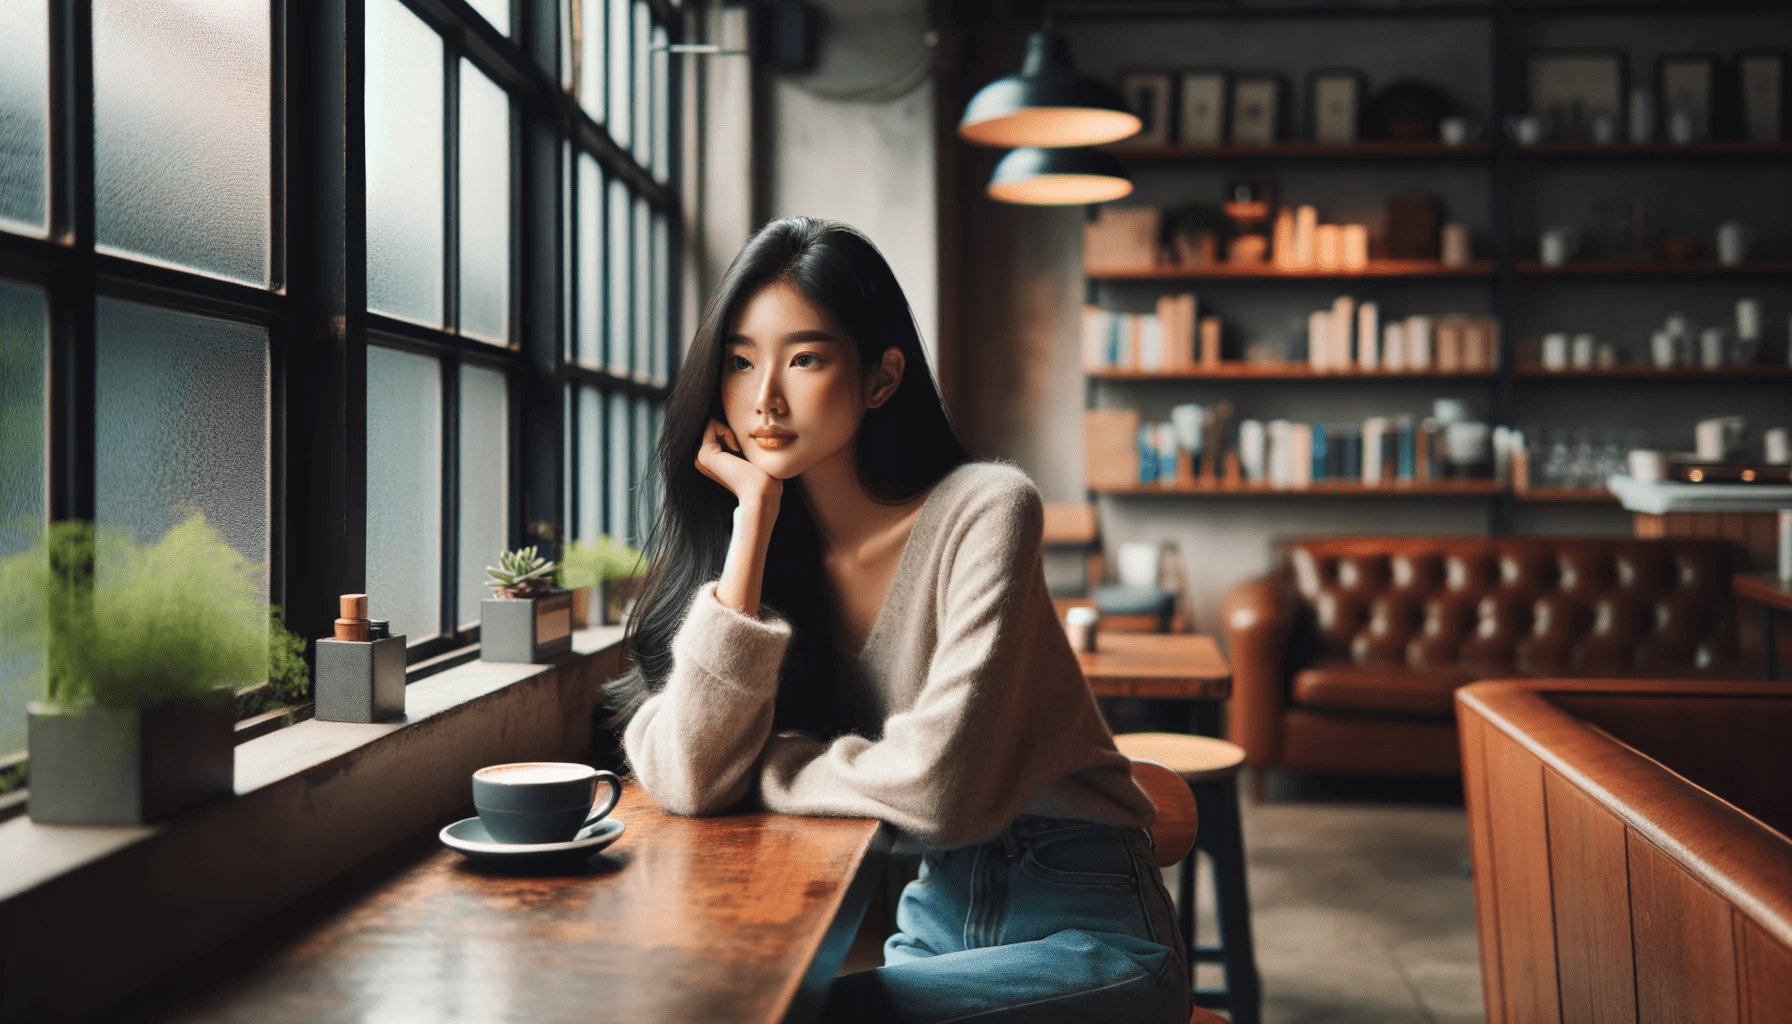 Asian woman in her 20s with long black hair sitting alone at a wooden table in a cozy coffee shop. She is in a refl